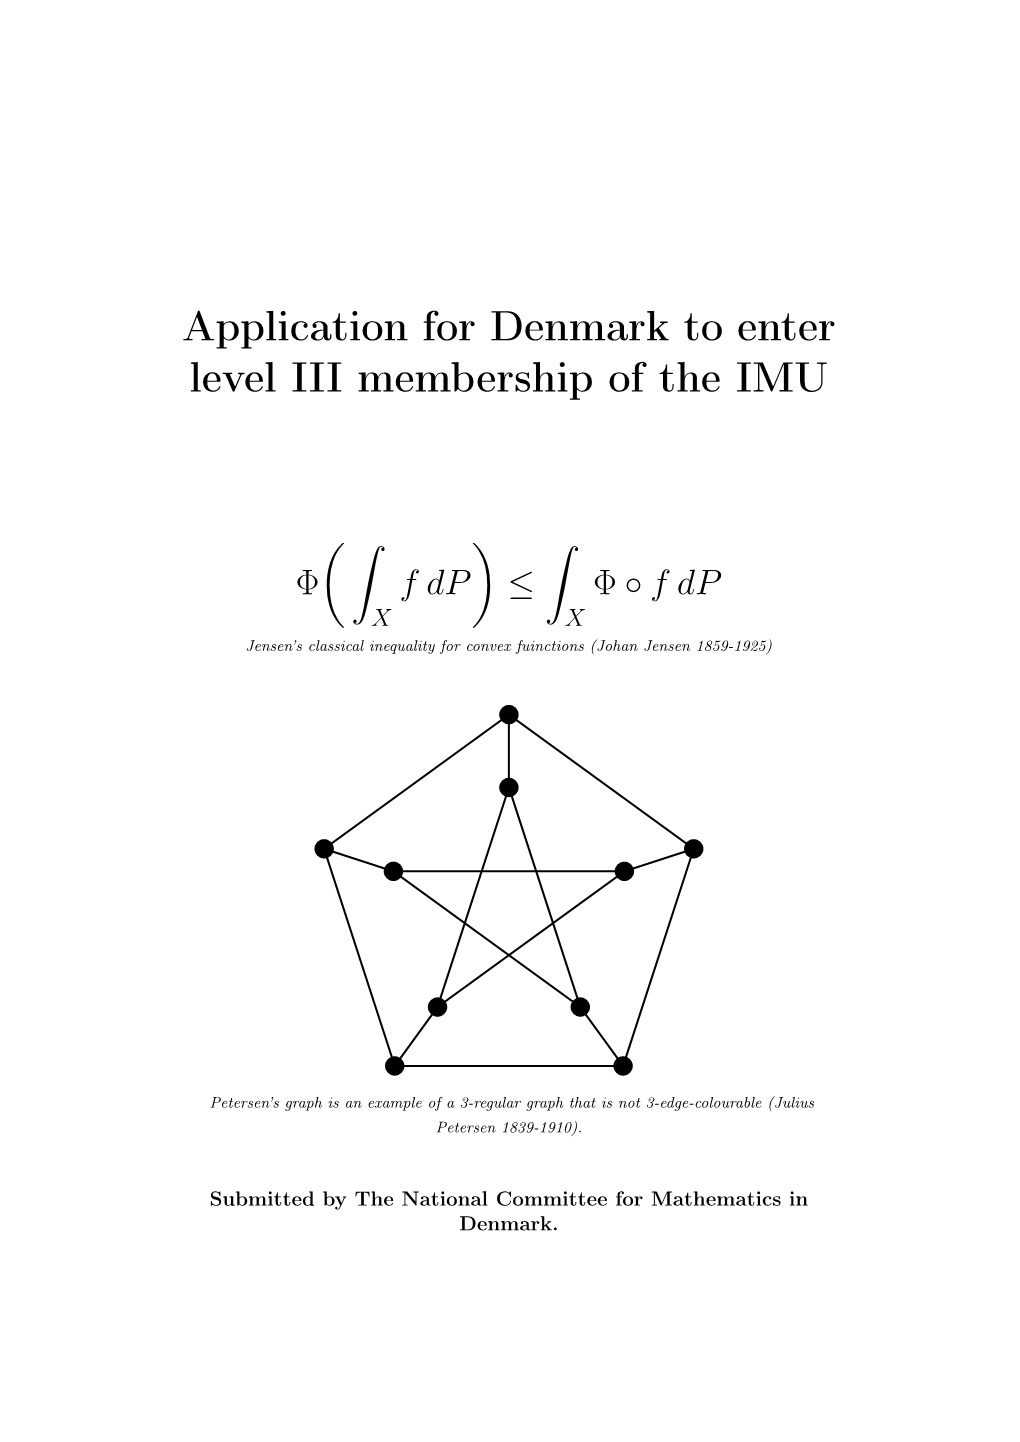 Application for Denmark to Enter Level III Membership of the IMU